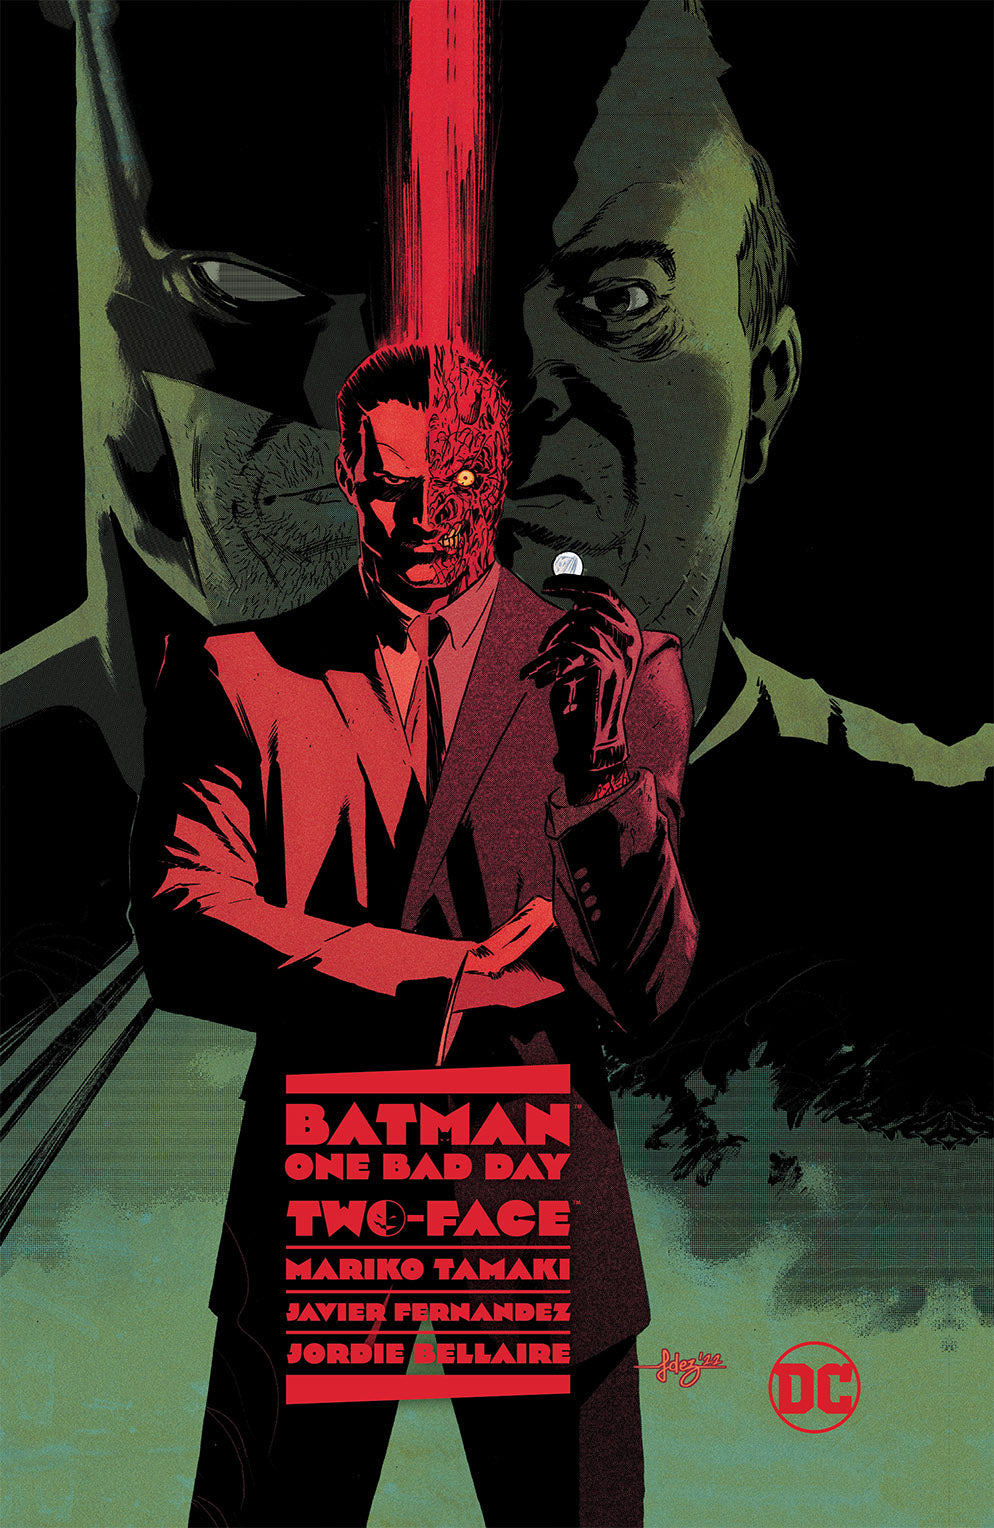 BATMAN ONE BAD DAY TWO-FACE HARDCOVER